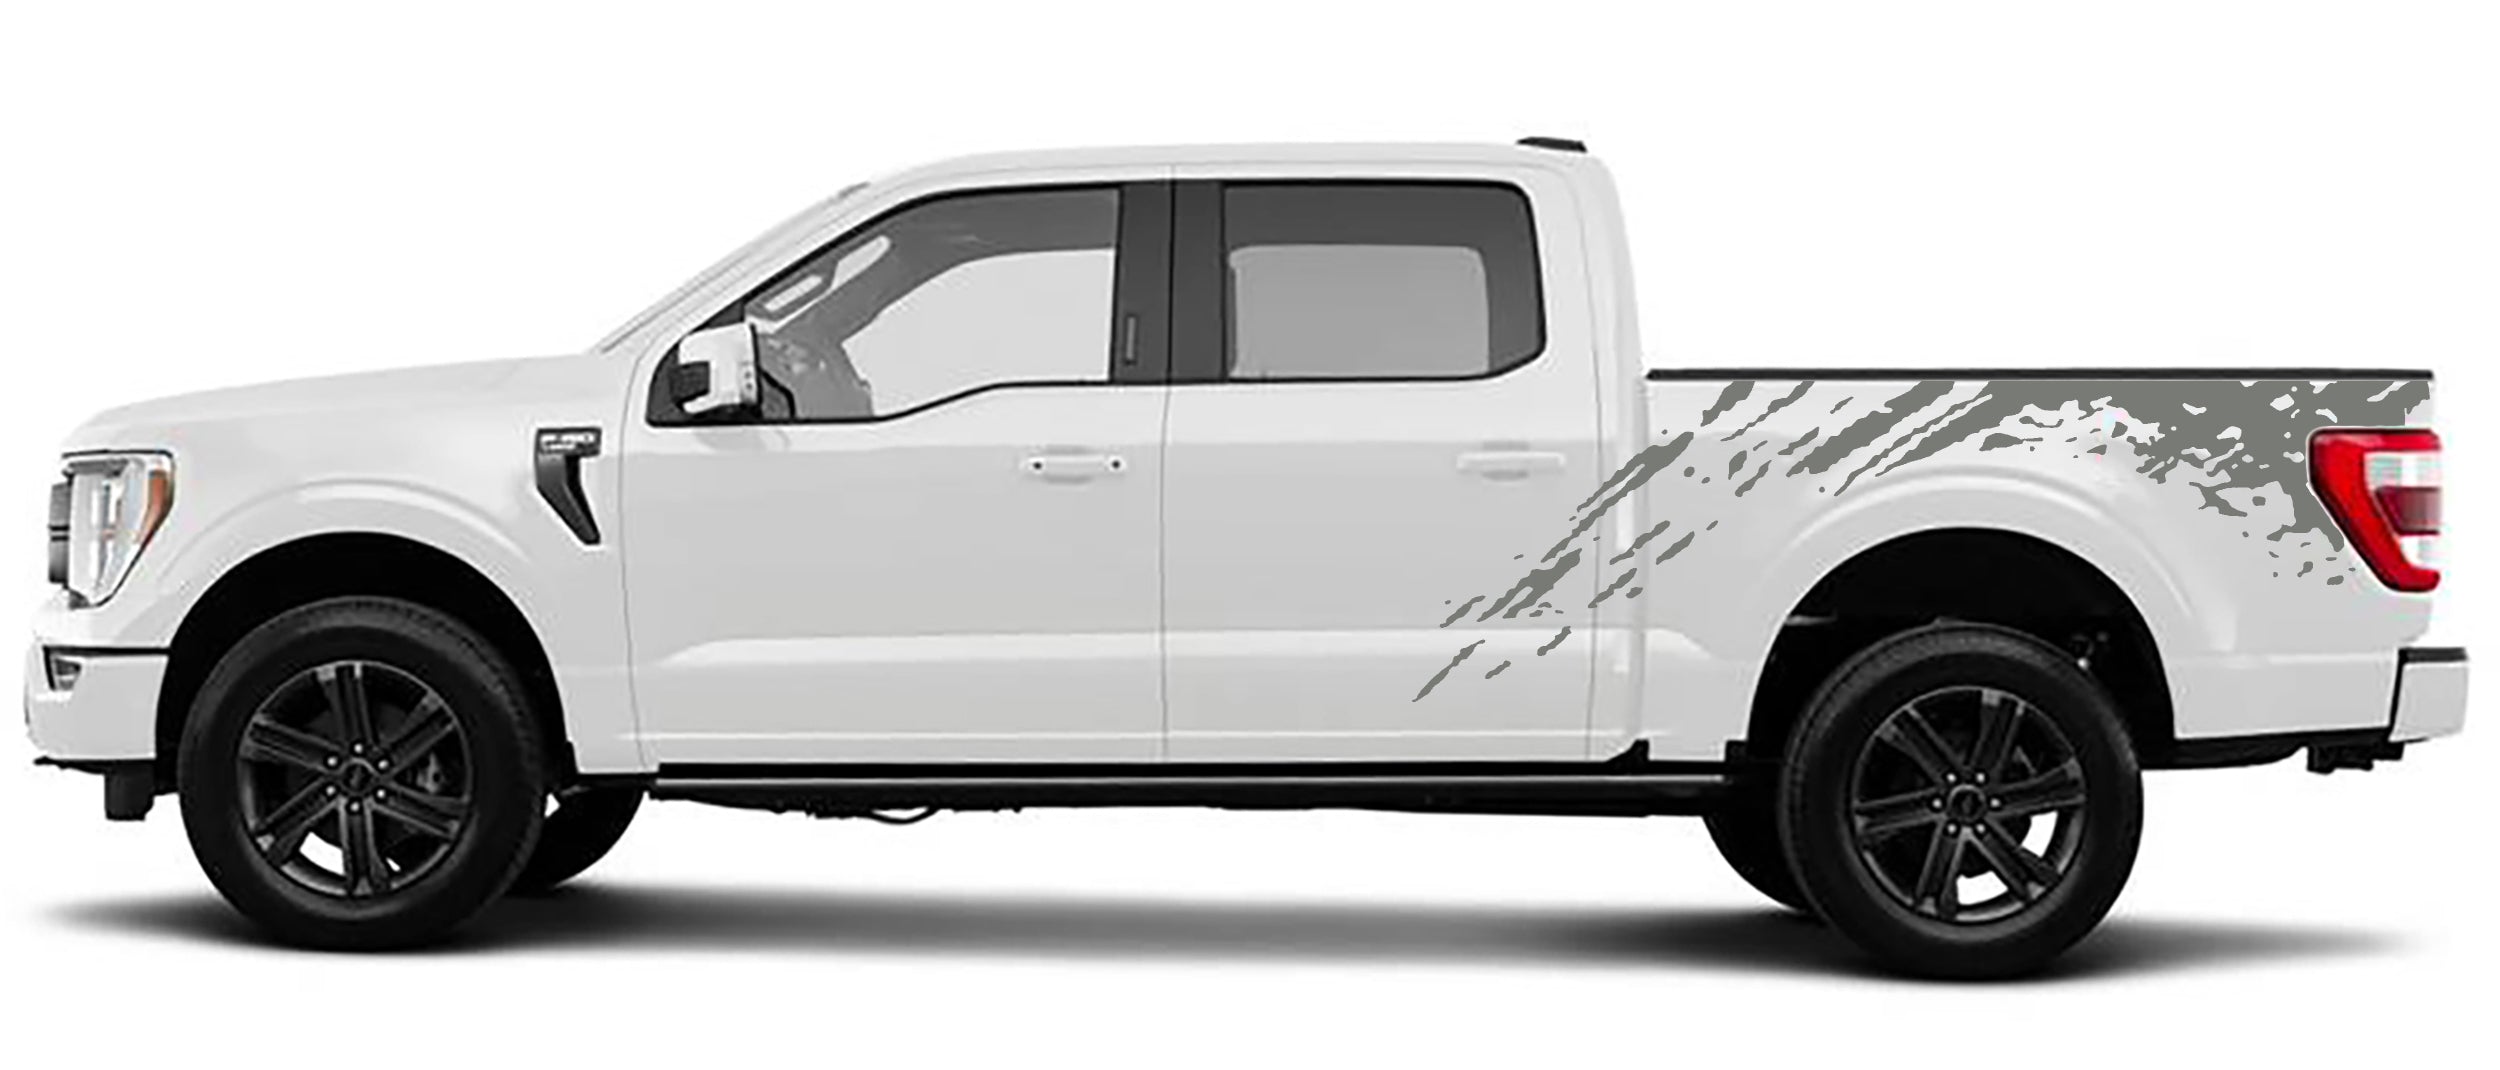 mud splash bed graphics for ford f 150 2021 to 2023 models gray